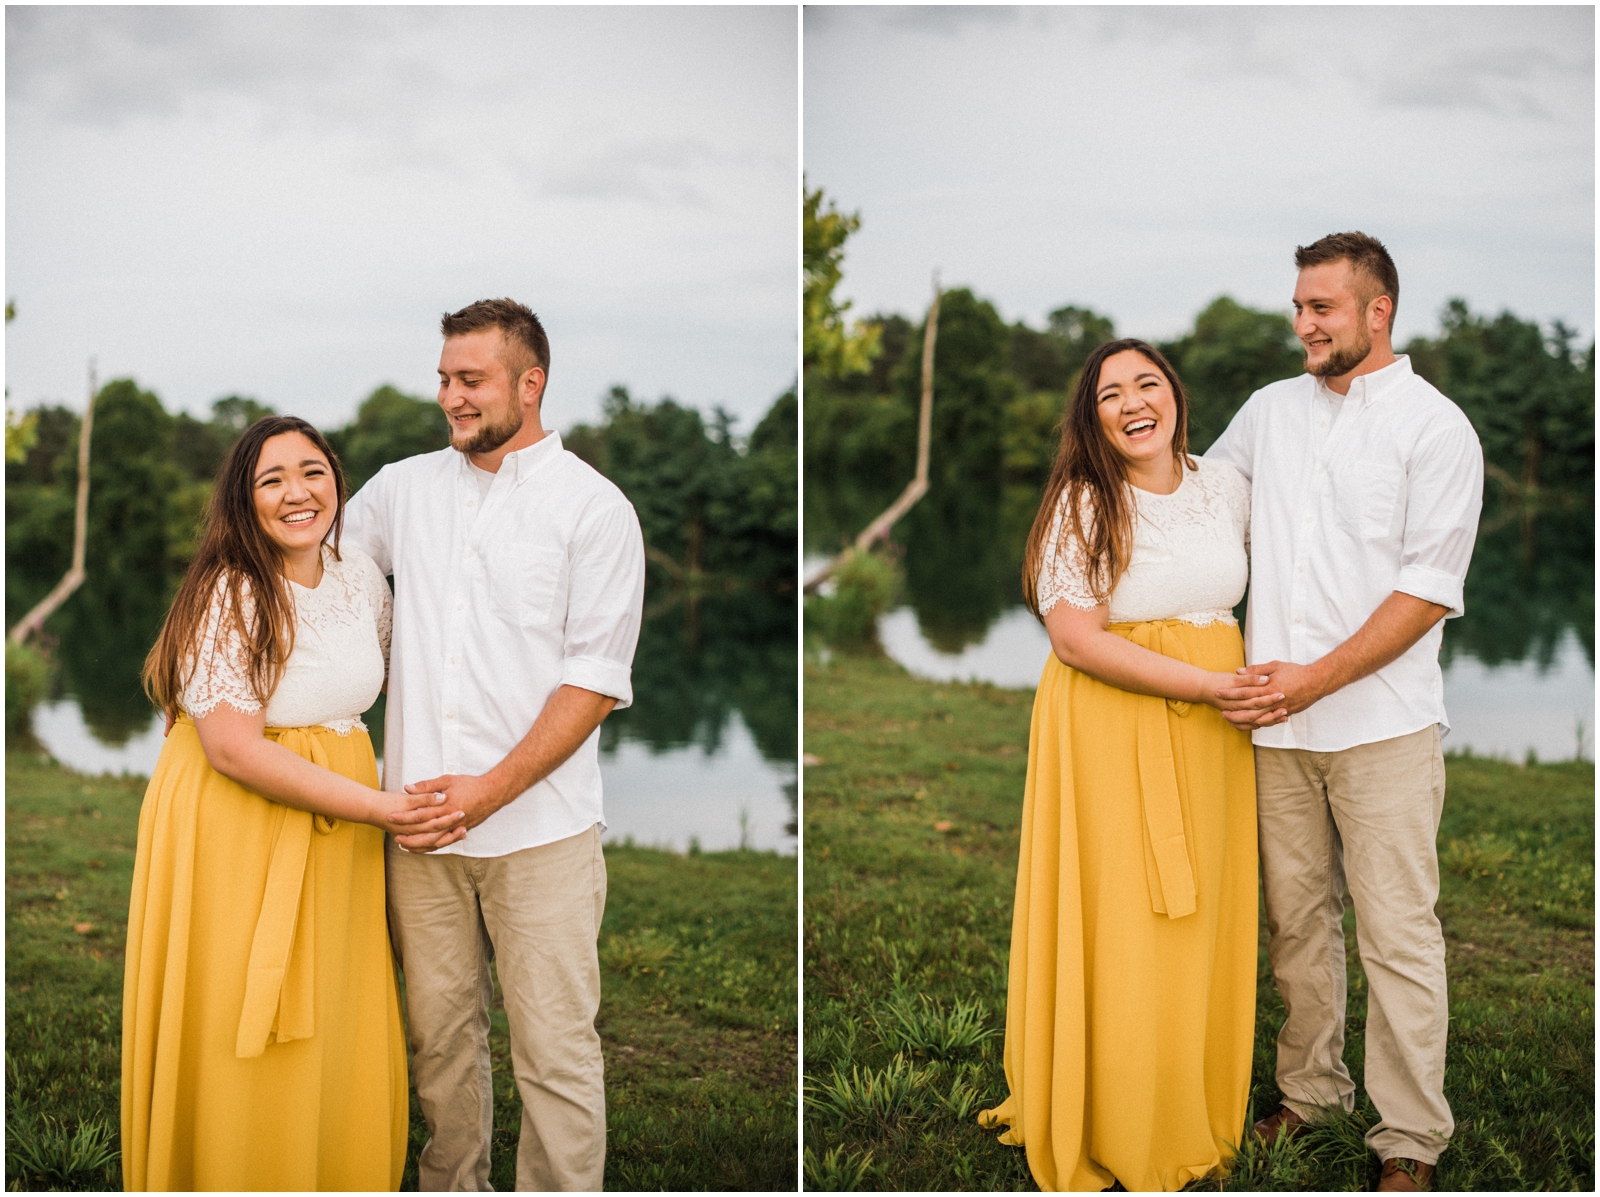  couple holding hands during photo session  